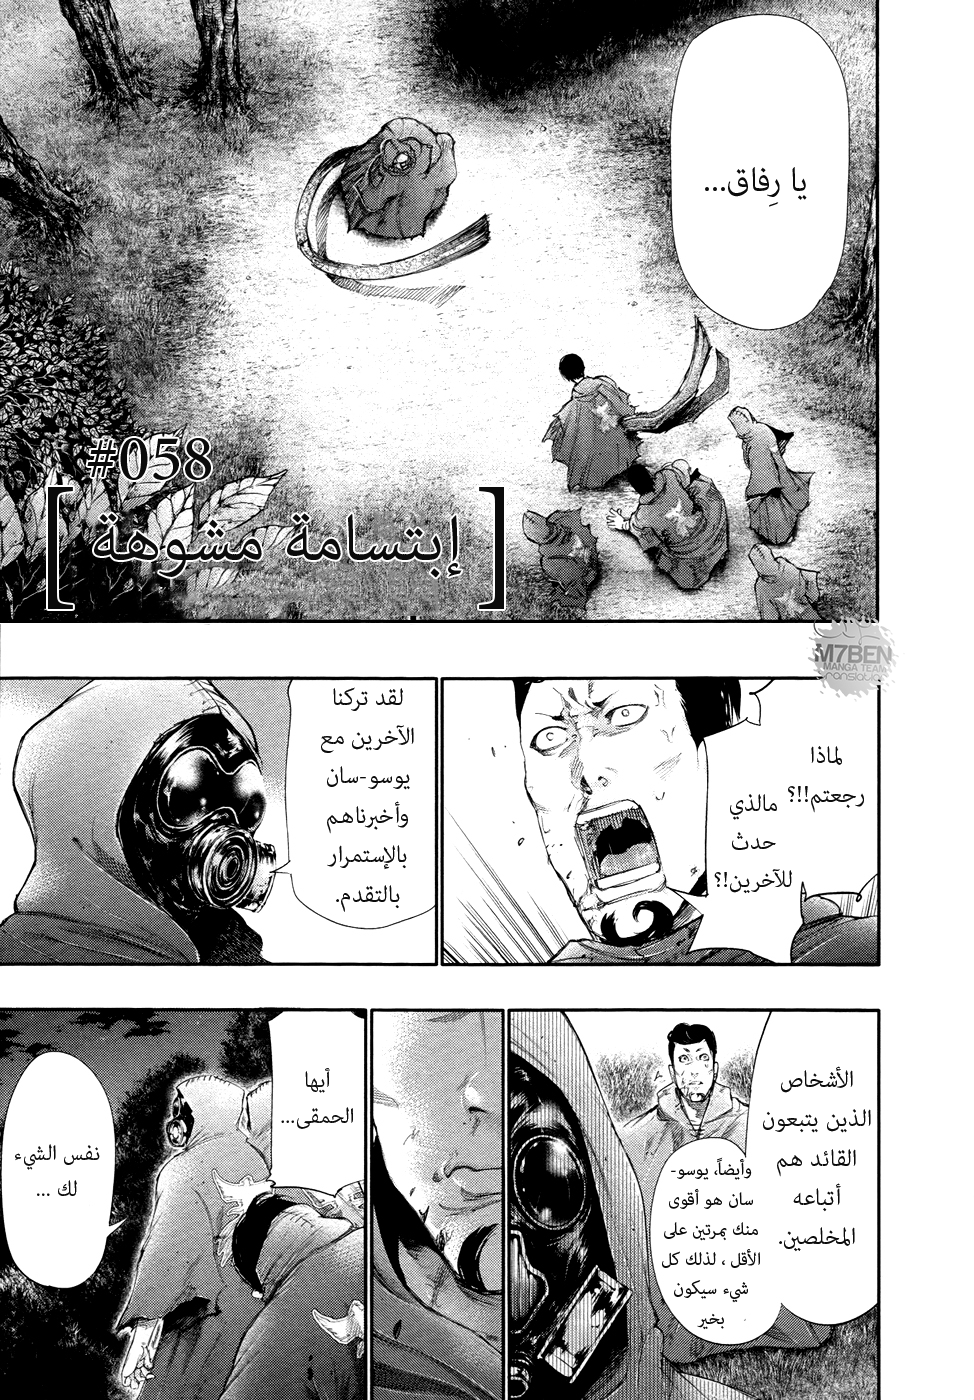 Tokyo Ghoul: Chapter 58 - Page 1